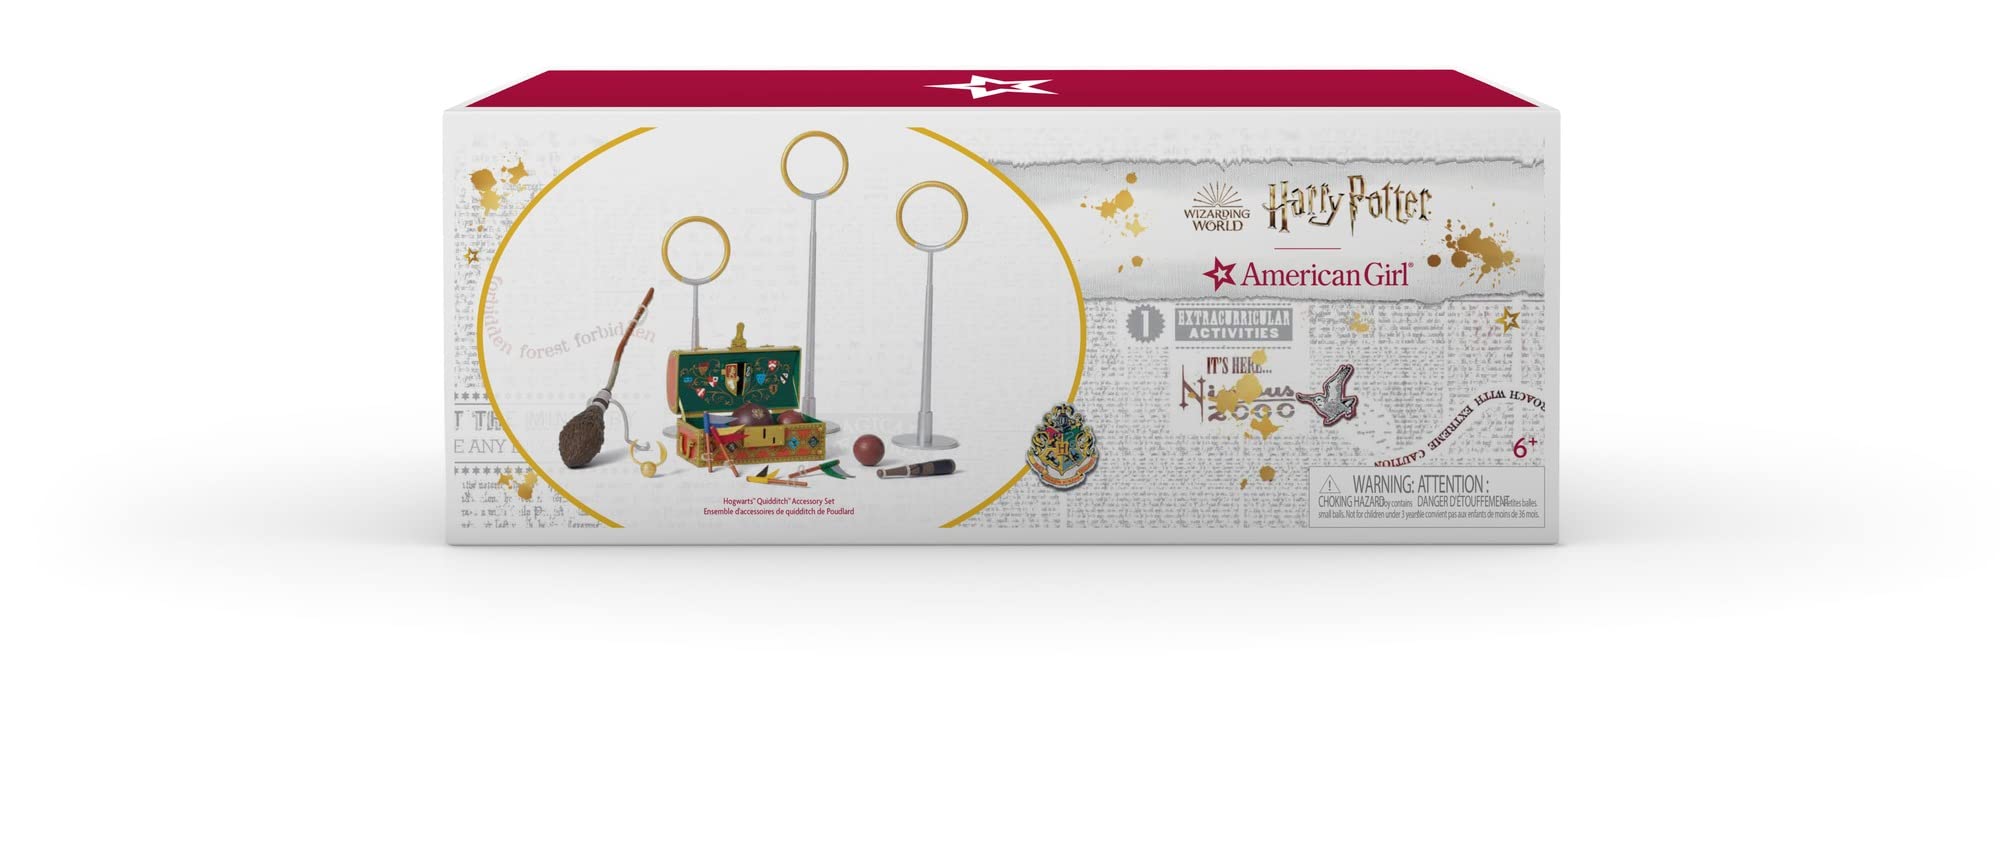 American Girl Harry Potter Hogwarts Quidditch 13-Piece Accessory Set with a Broomstick, Three Ring Goals, Golden Snitch, and House pennants: Gryffindor, Hufflepuff, Ravenclaw, and Slytherin